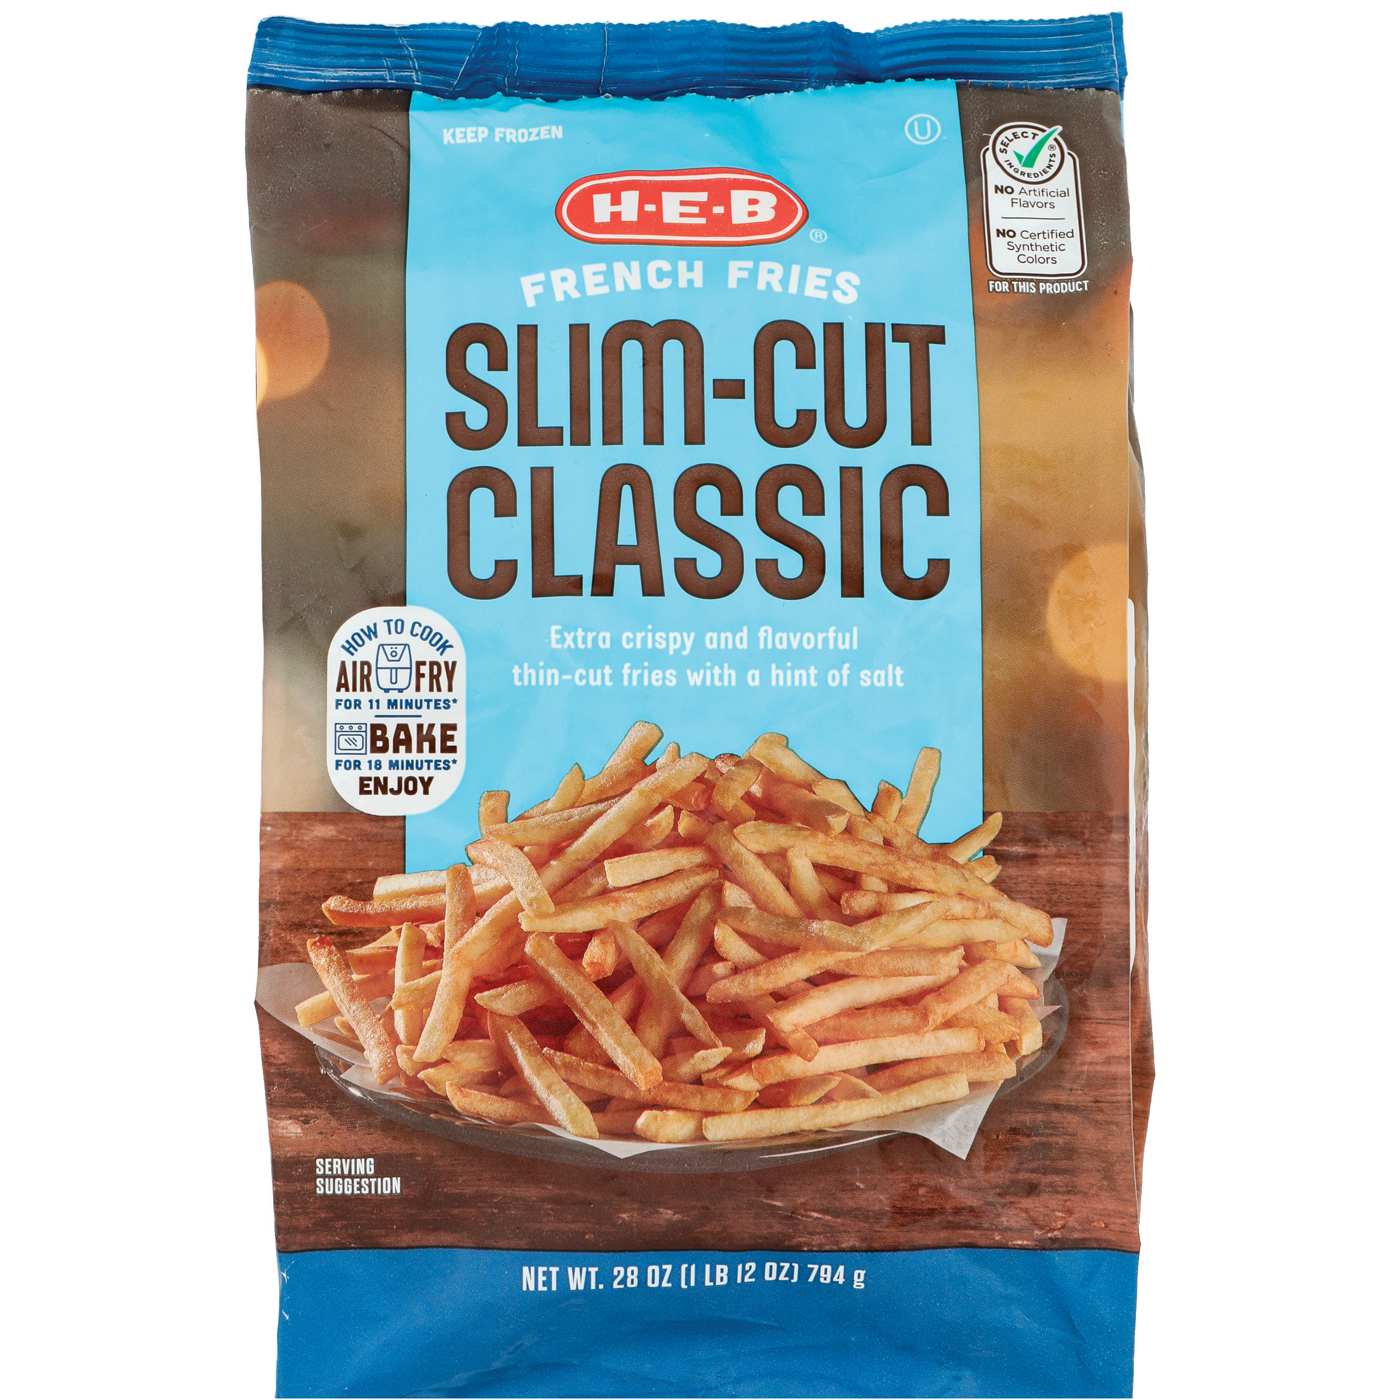 H-E-B Frozen French Fries – Slim-Cut Classic; image 1 of 2